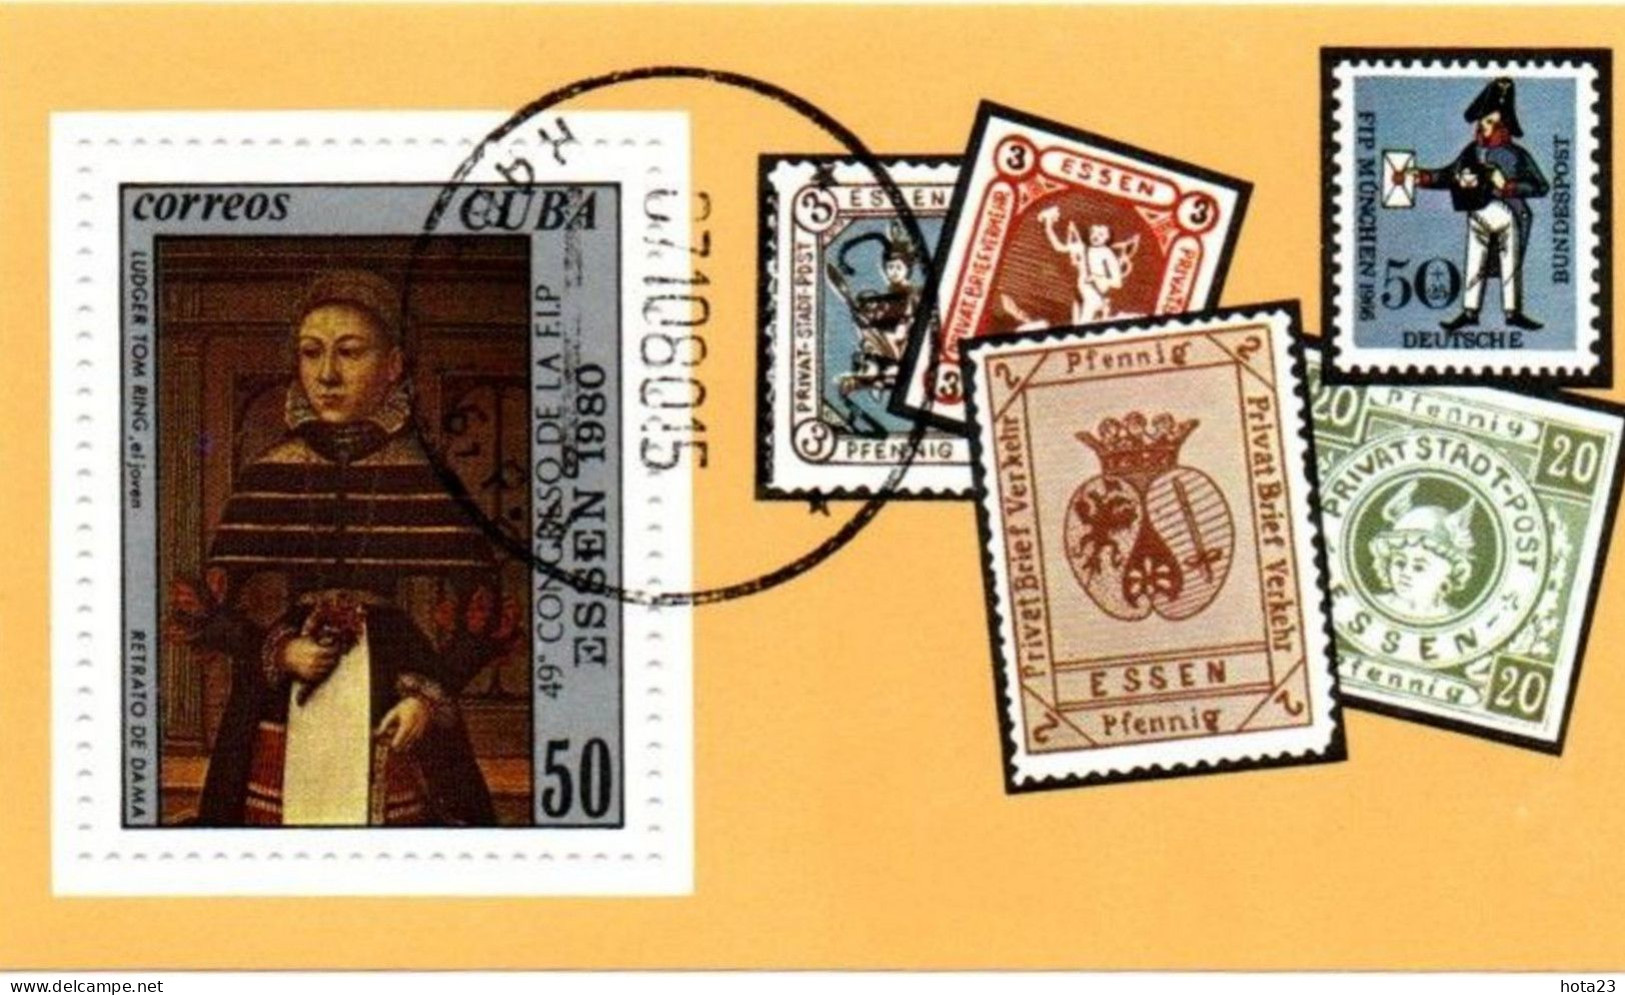 (!) CUBA 1980 STAMP ON STAMPS ESSEN - Germany 1980 EXHIBITION Painting Portrait Of A Lady, Ludger Tom Ring MI BL 64 - Oblitérés